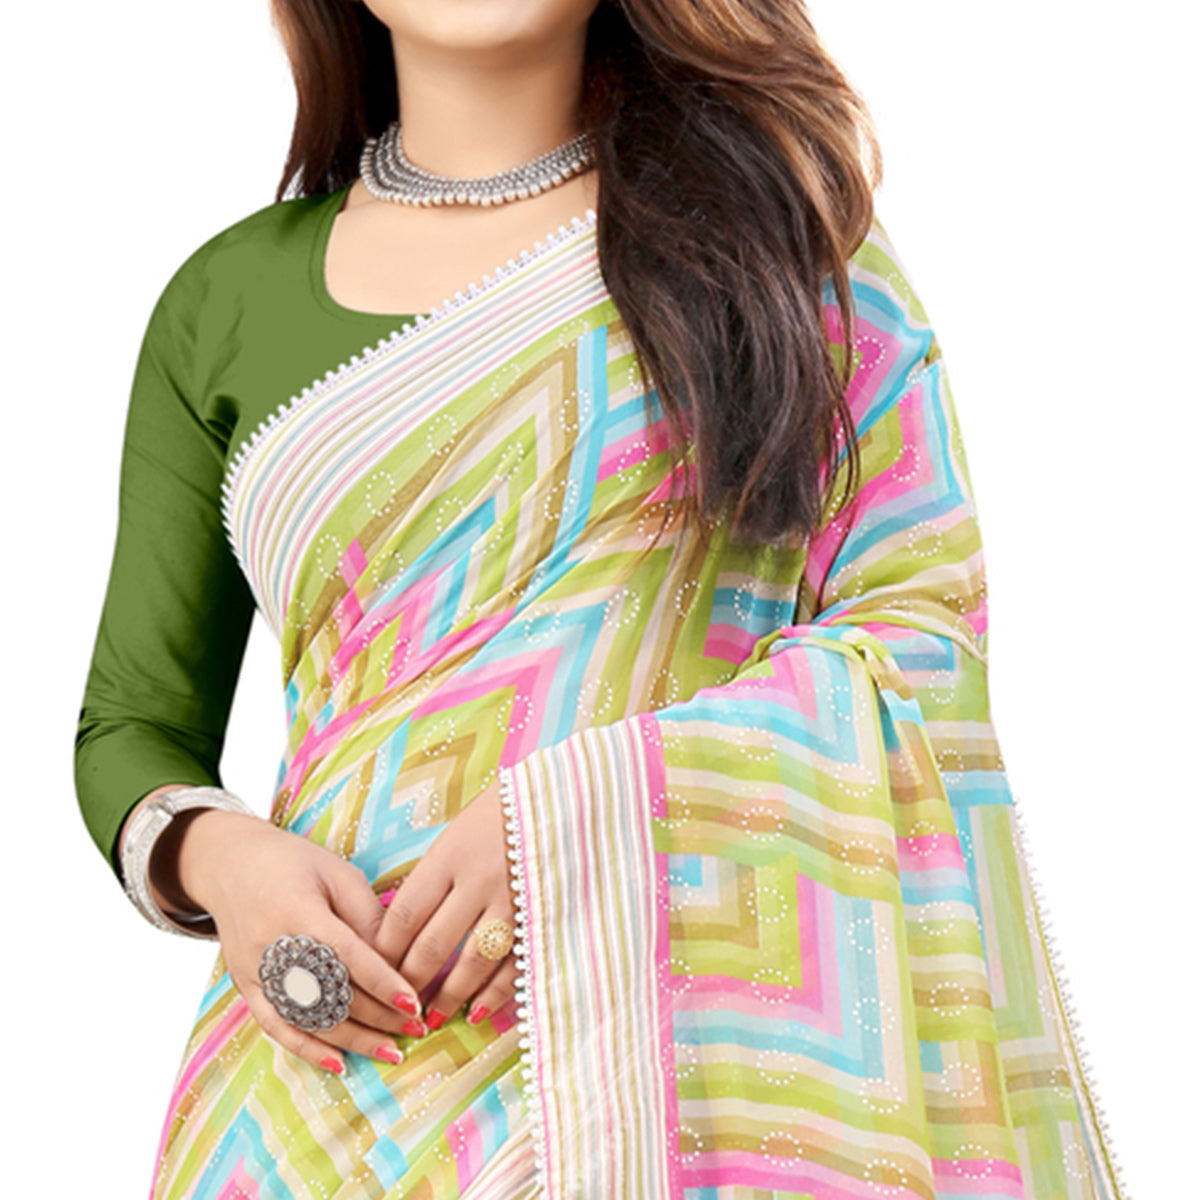 Light Green Checked Printed Georgette Saree